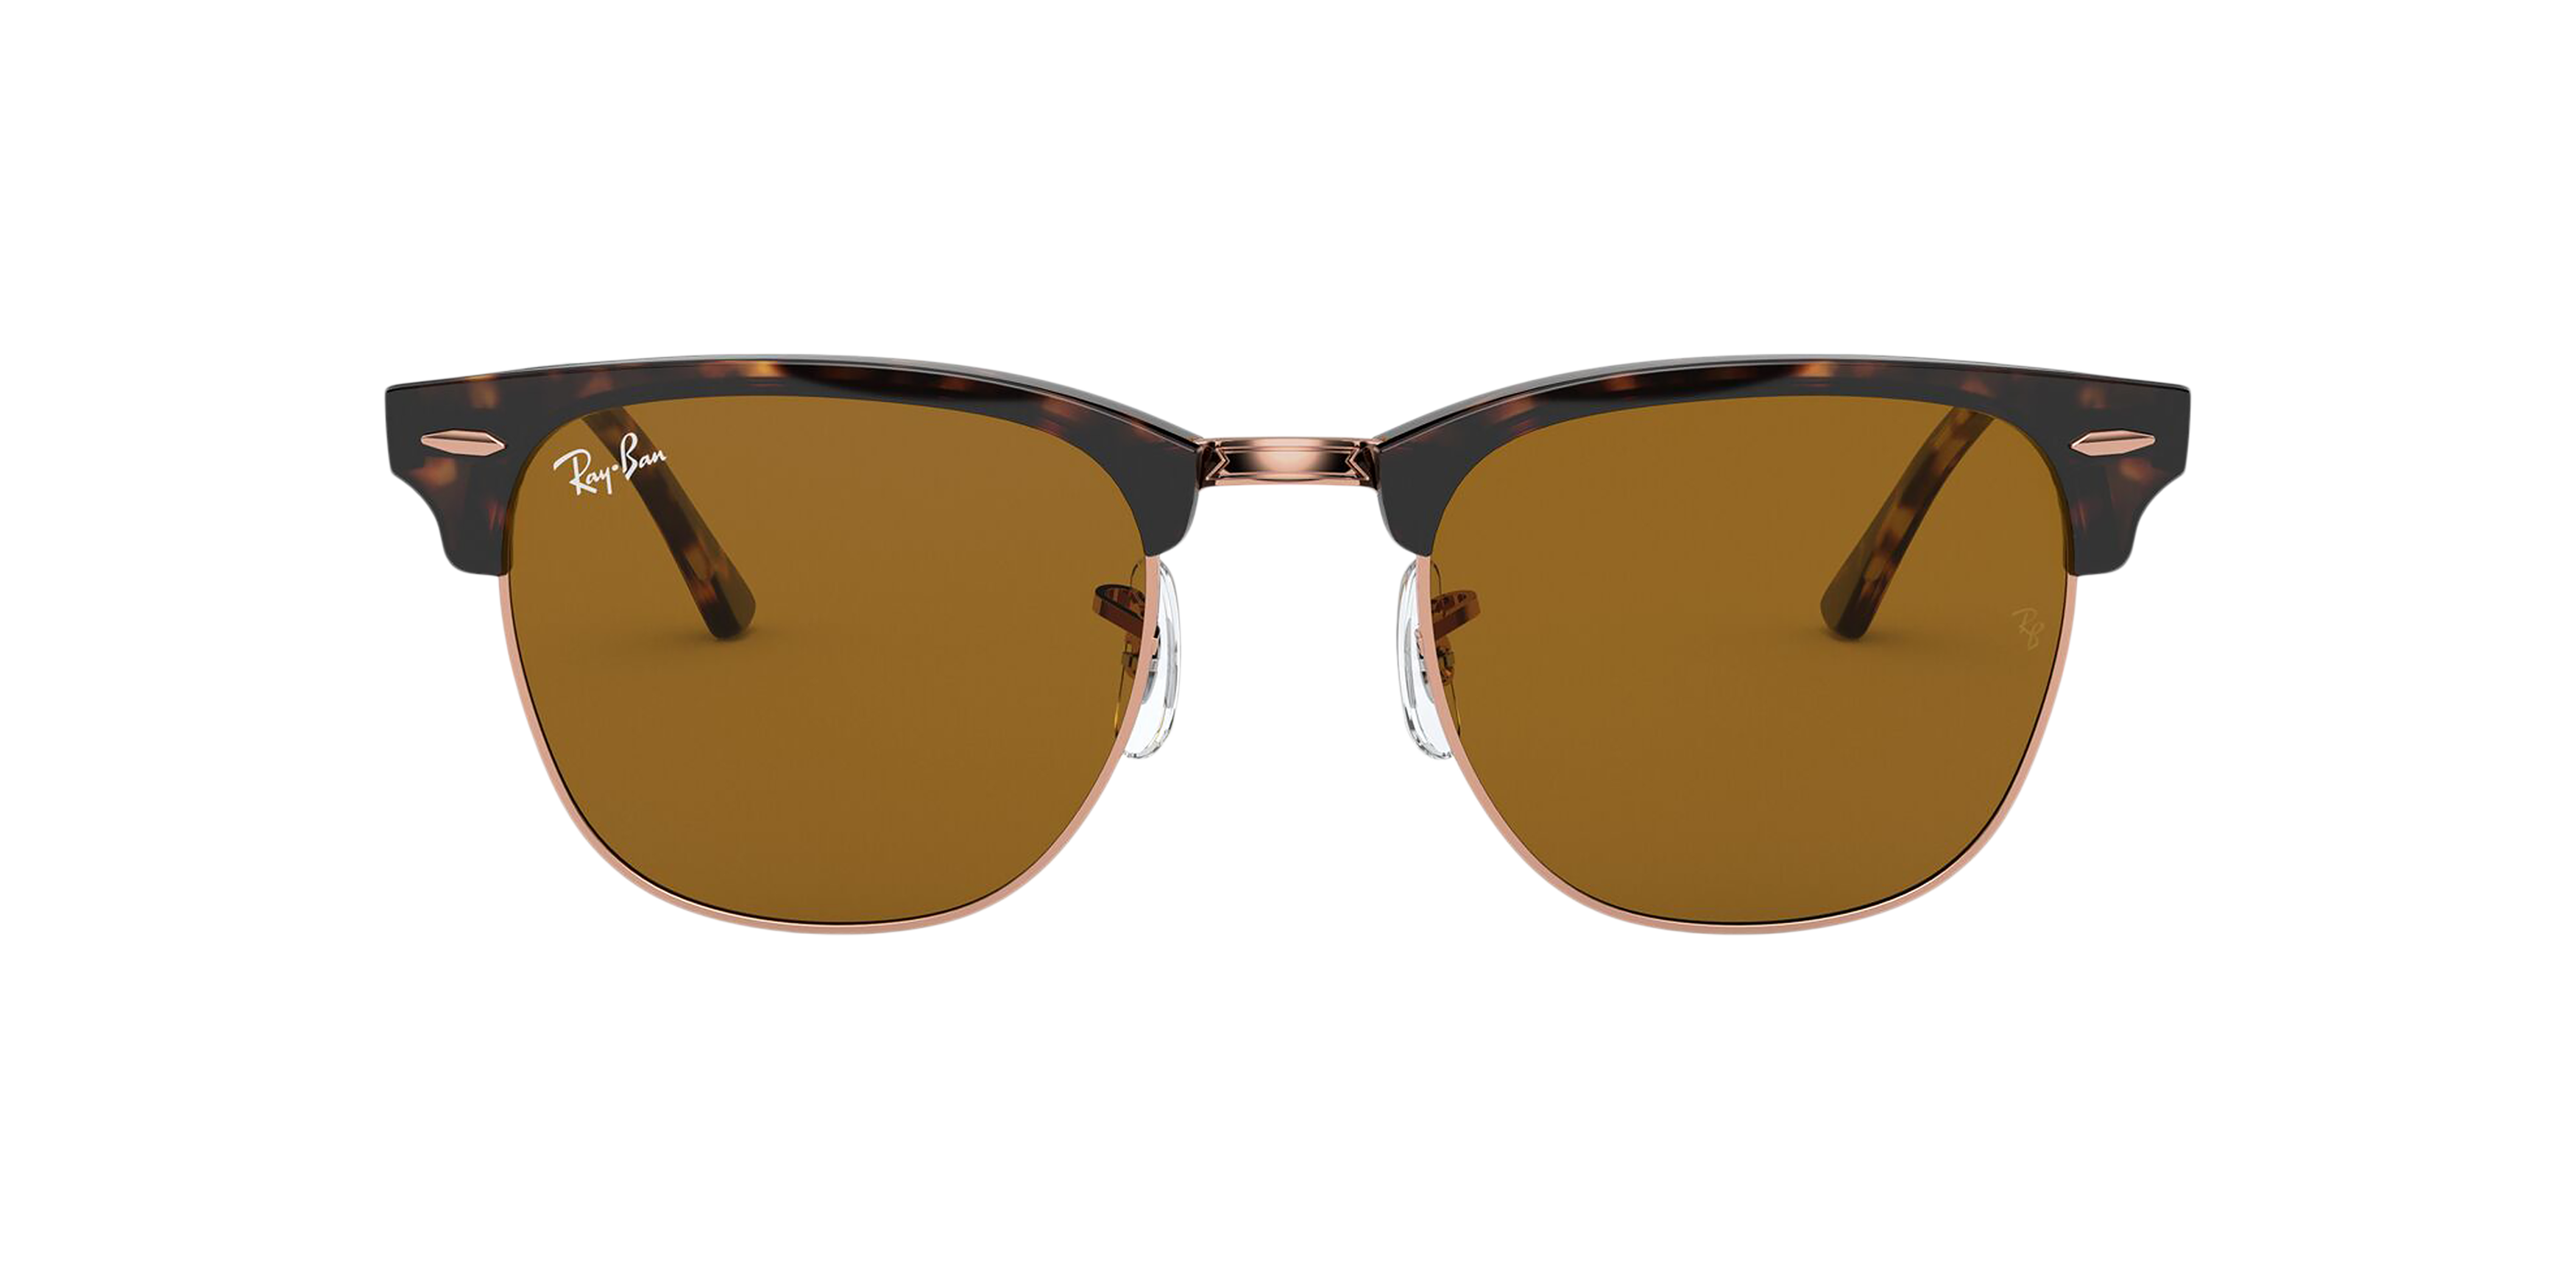 [products.image.front] Ray-Ban Clubmaster Classic RB3016 130933